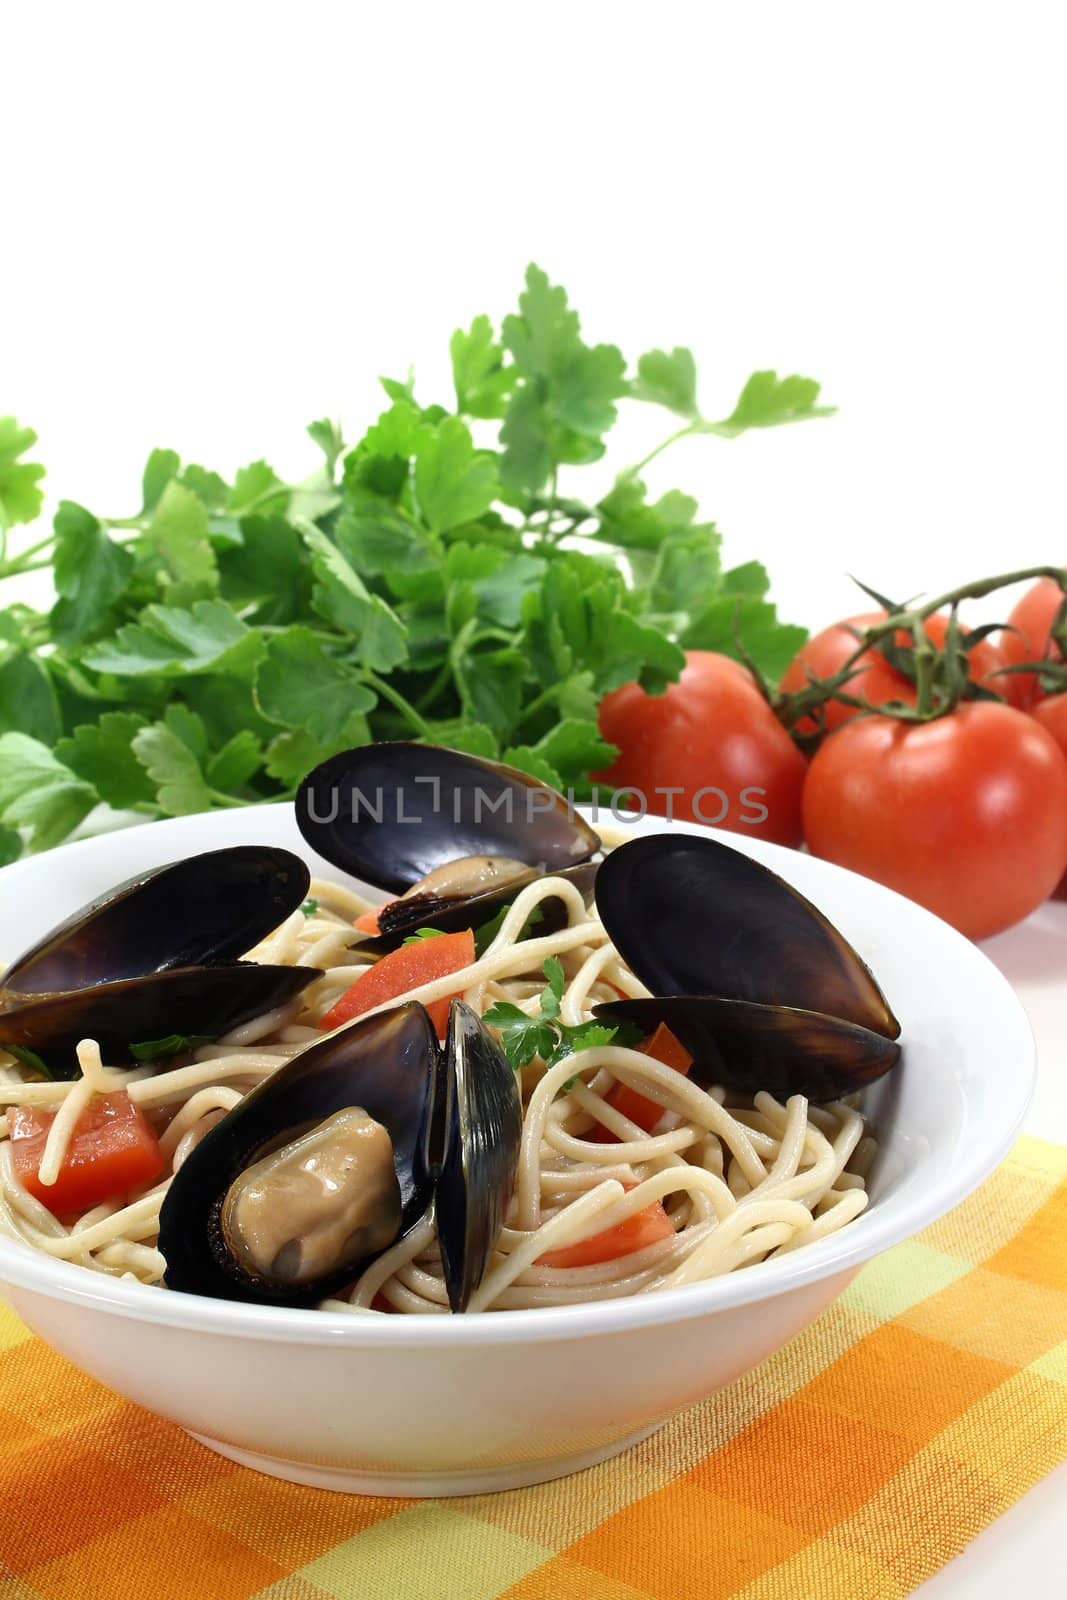 Spaghetti with tomatoes, mussels and parsley on a light background